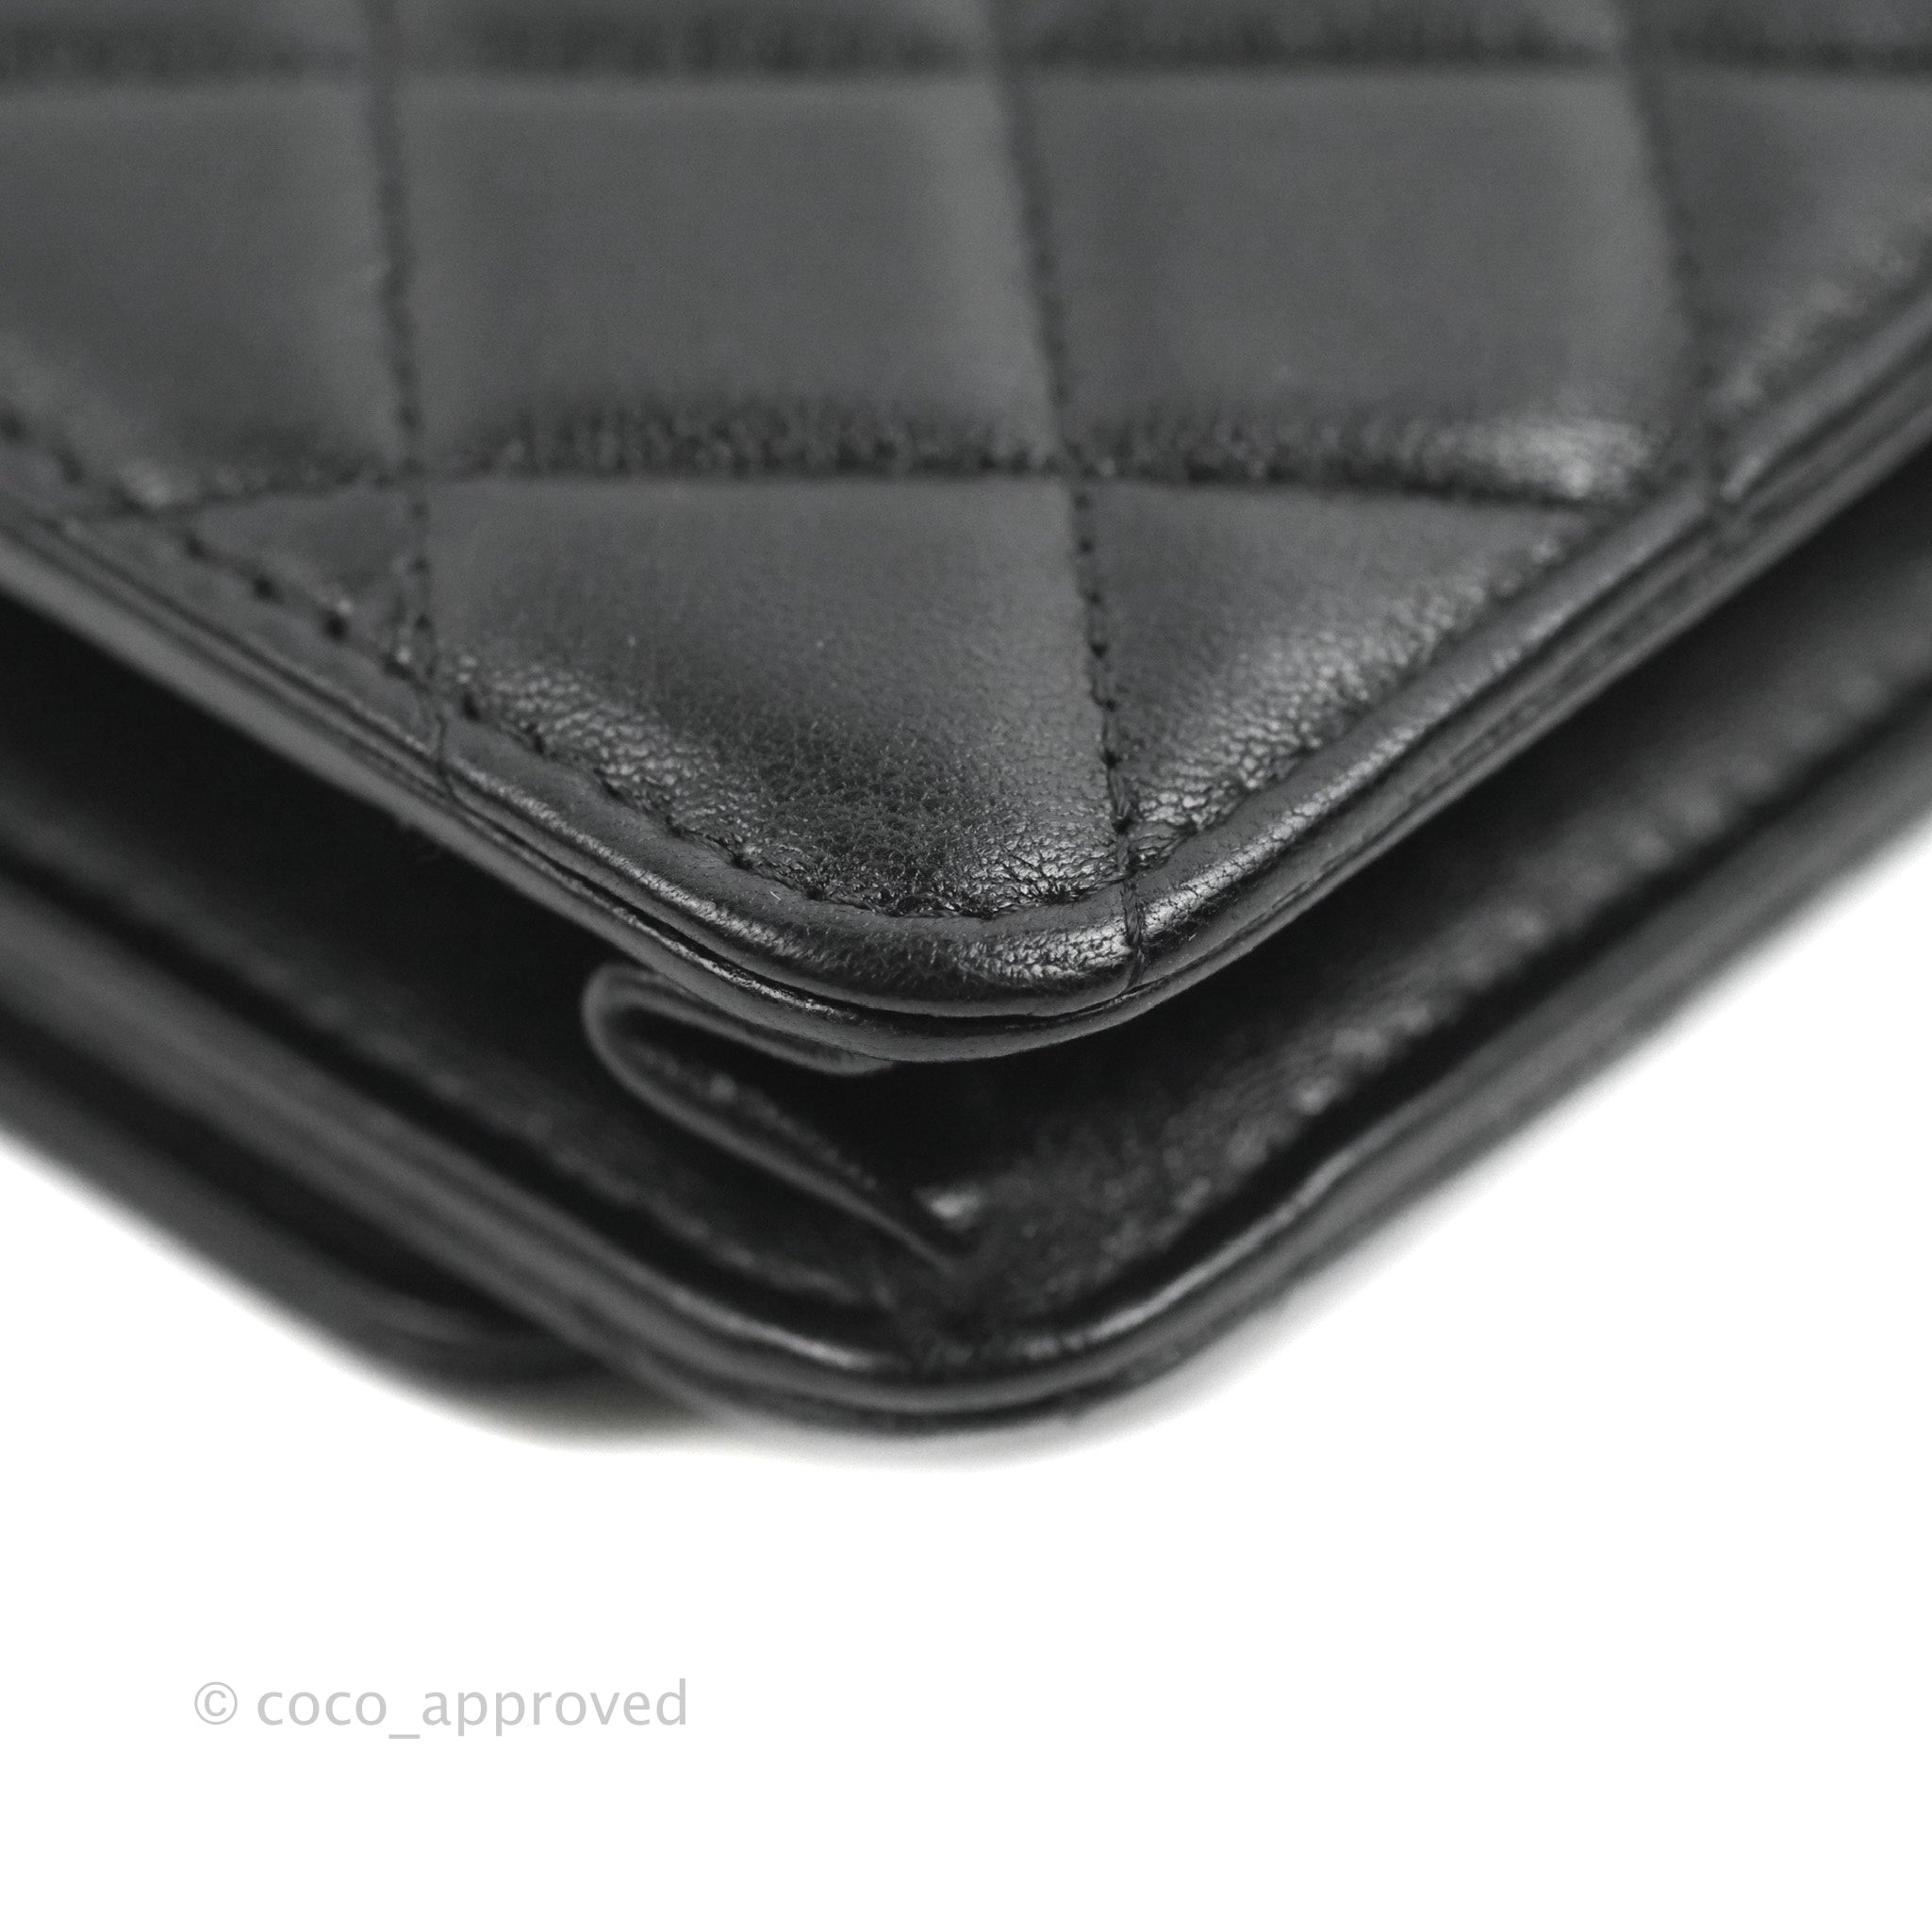 Chanel Black Quilted Lambskin Wallet On Chain WOC Brushed